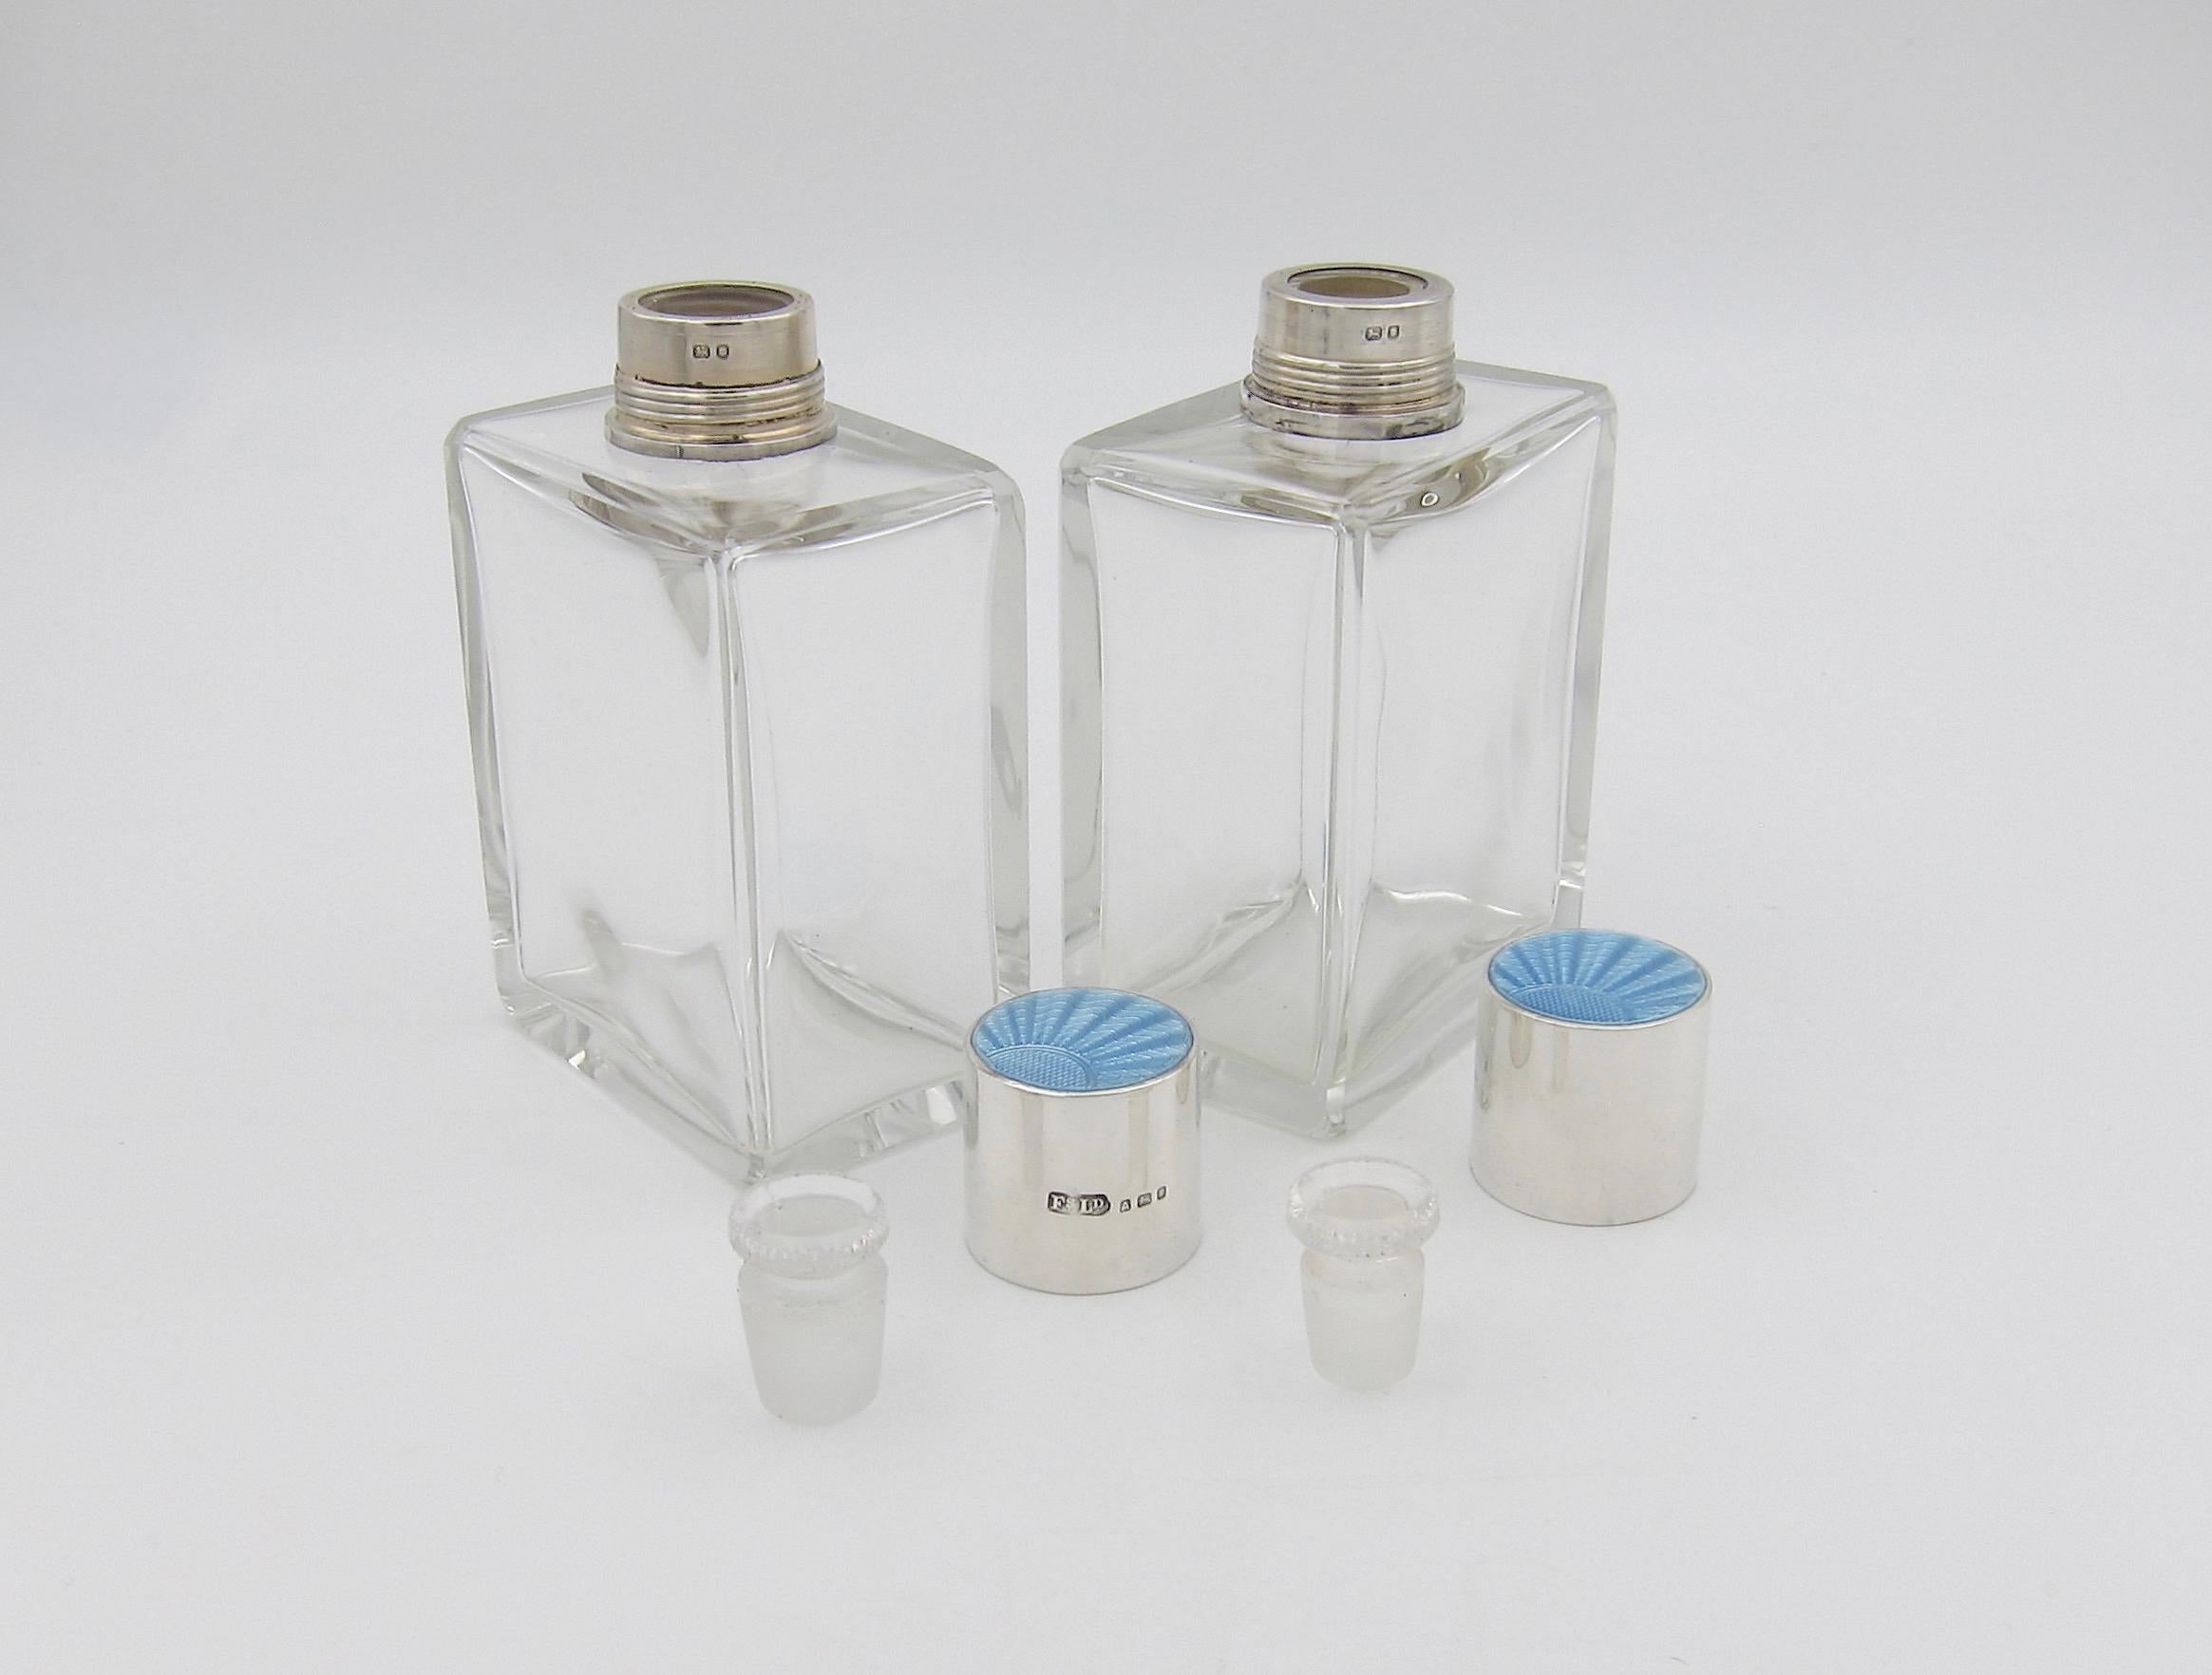 20th Century 1936 English Art Deco Perfume Bottles with Sterling Silver and Blue Enamel Tops